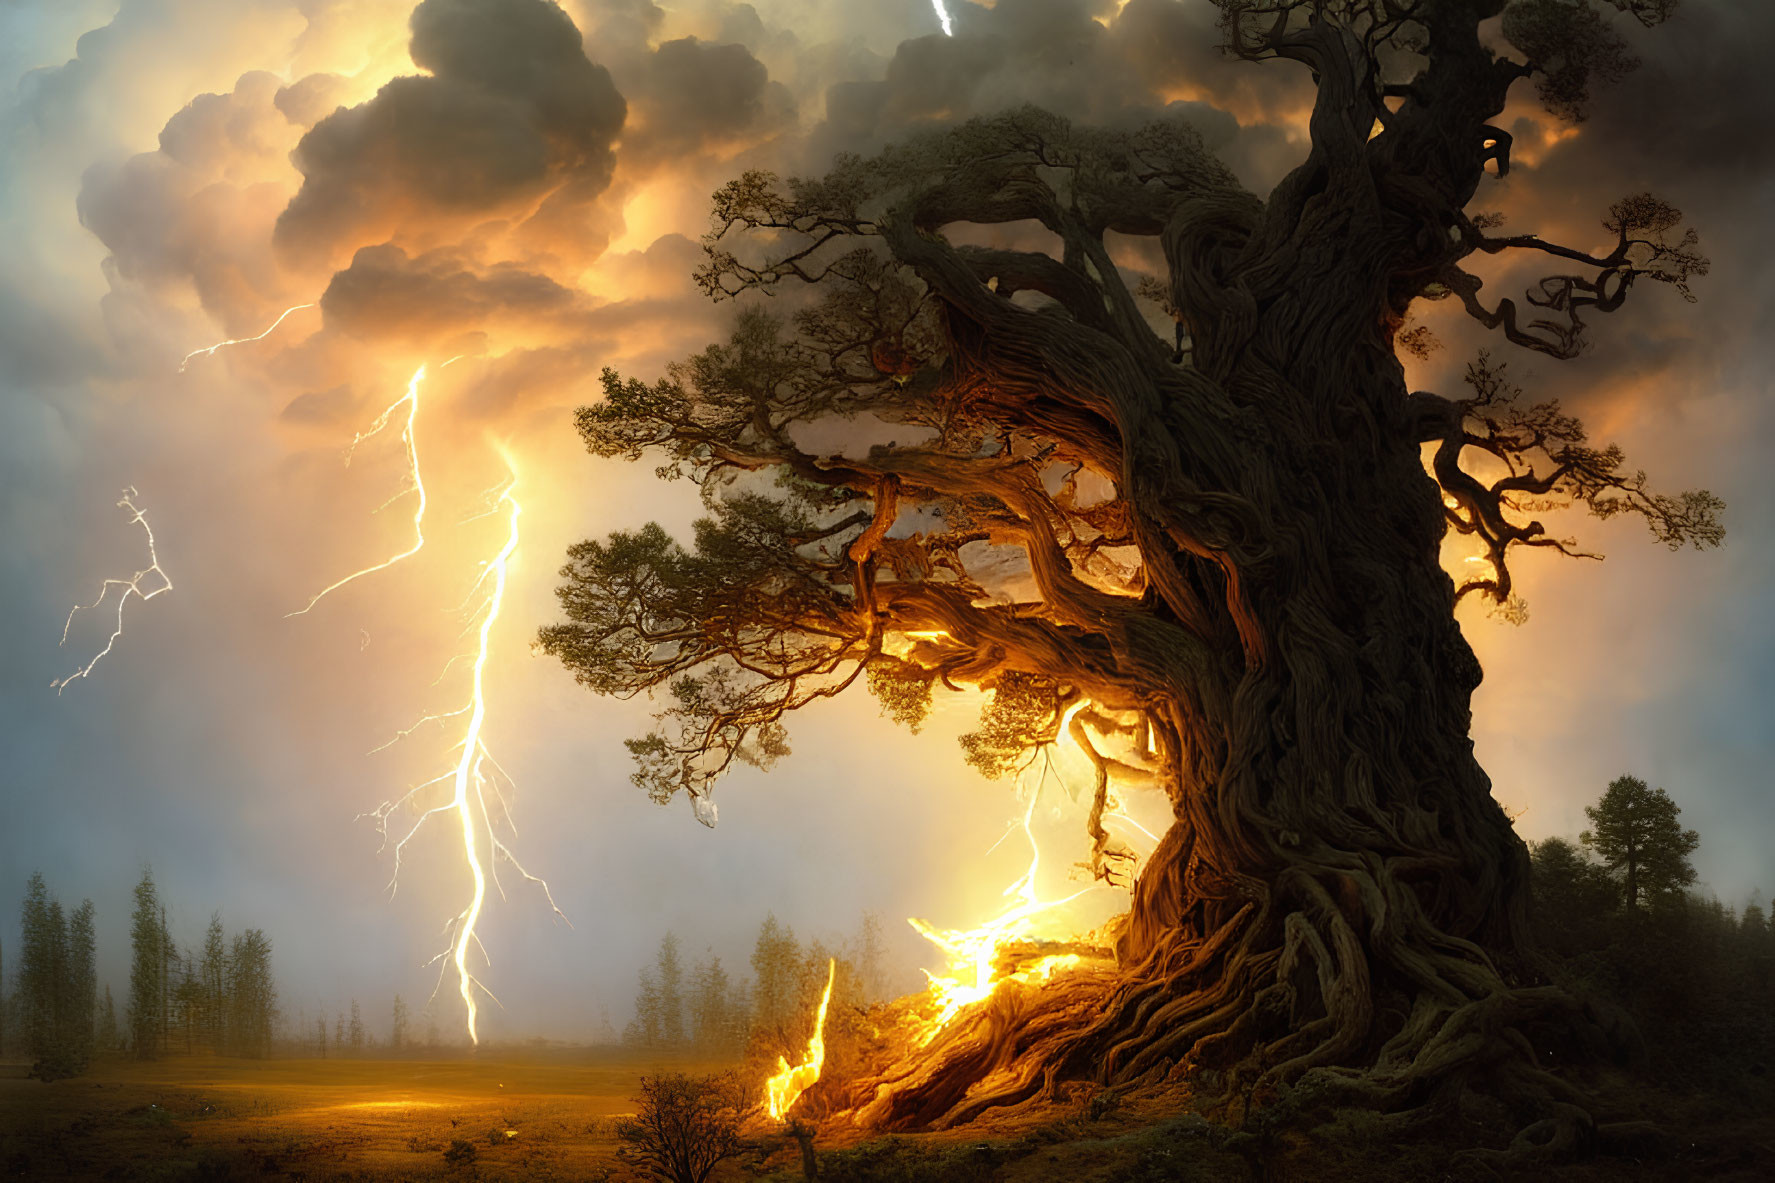 Ancient tree in stormy sky with lightning bolts striking forest